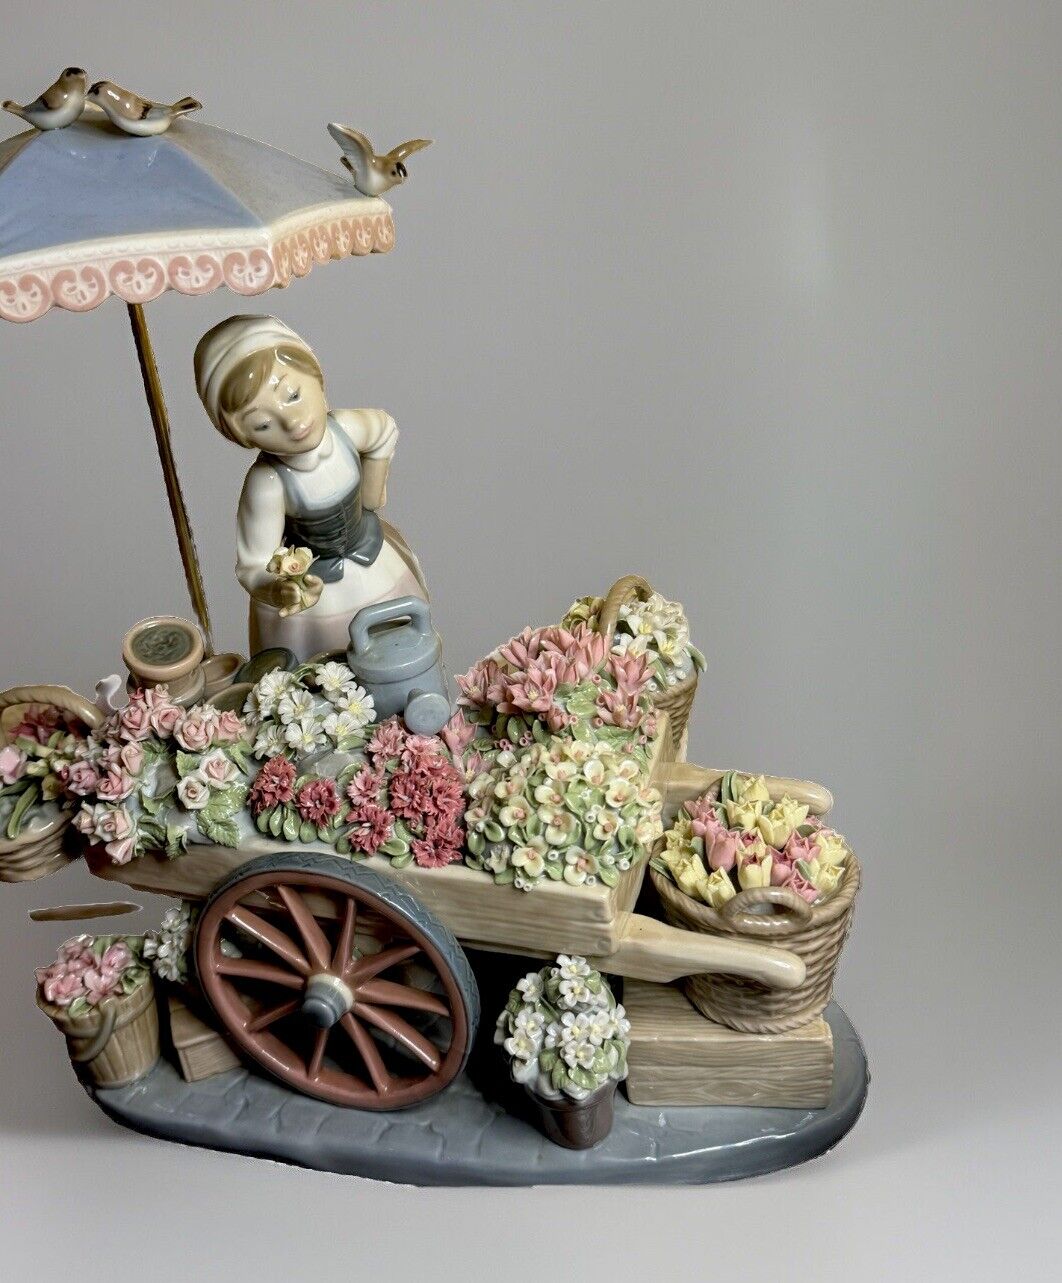 NEW SHIPS FROM SPAIN.  01001454 FLOWERS OF THE SEASON Figurine 1454. STUNNING